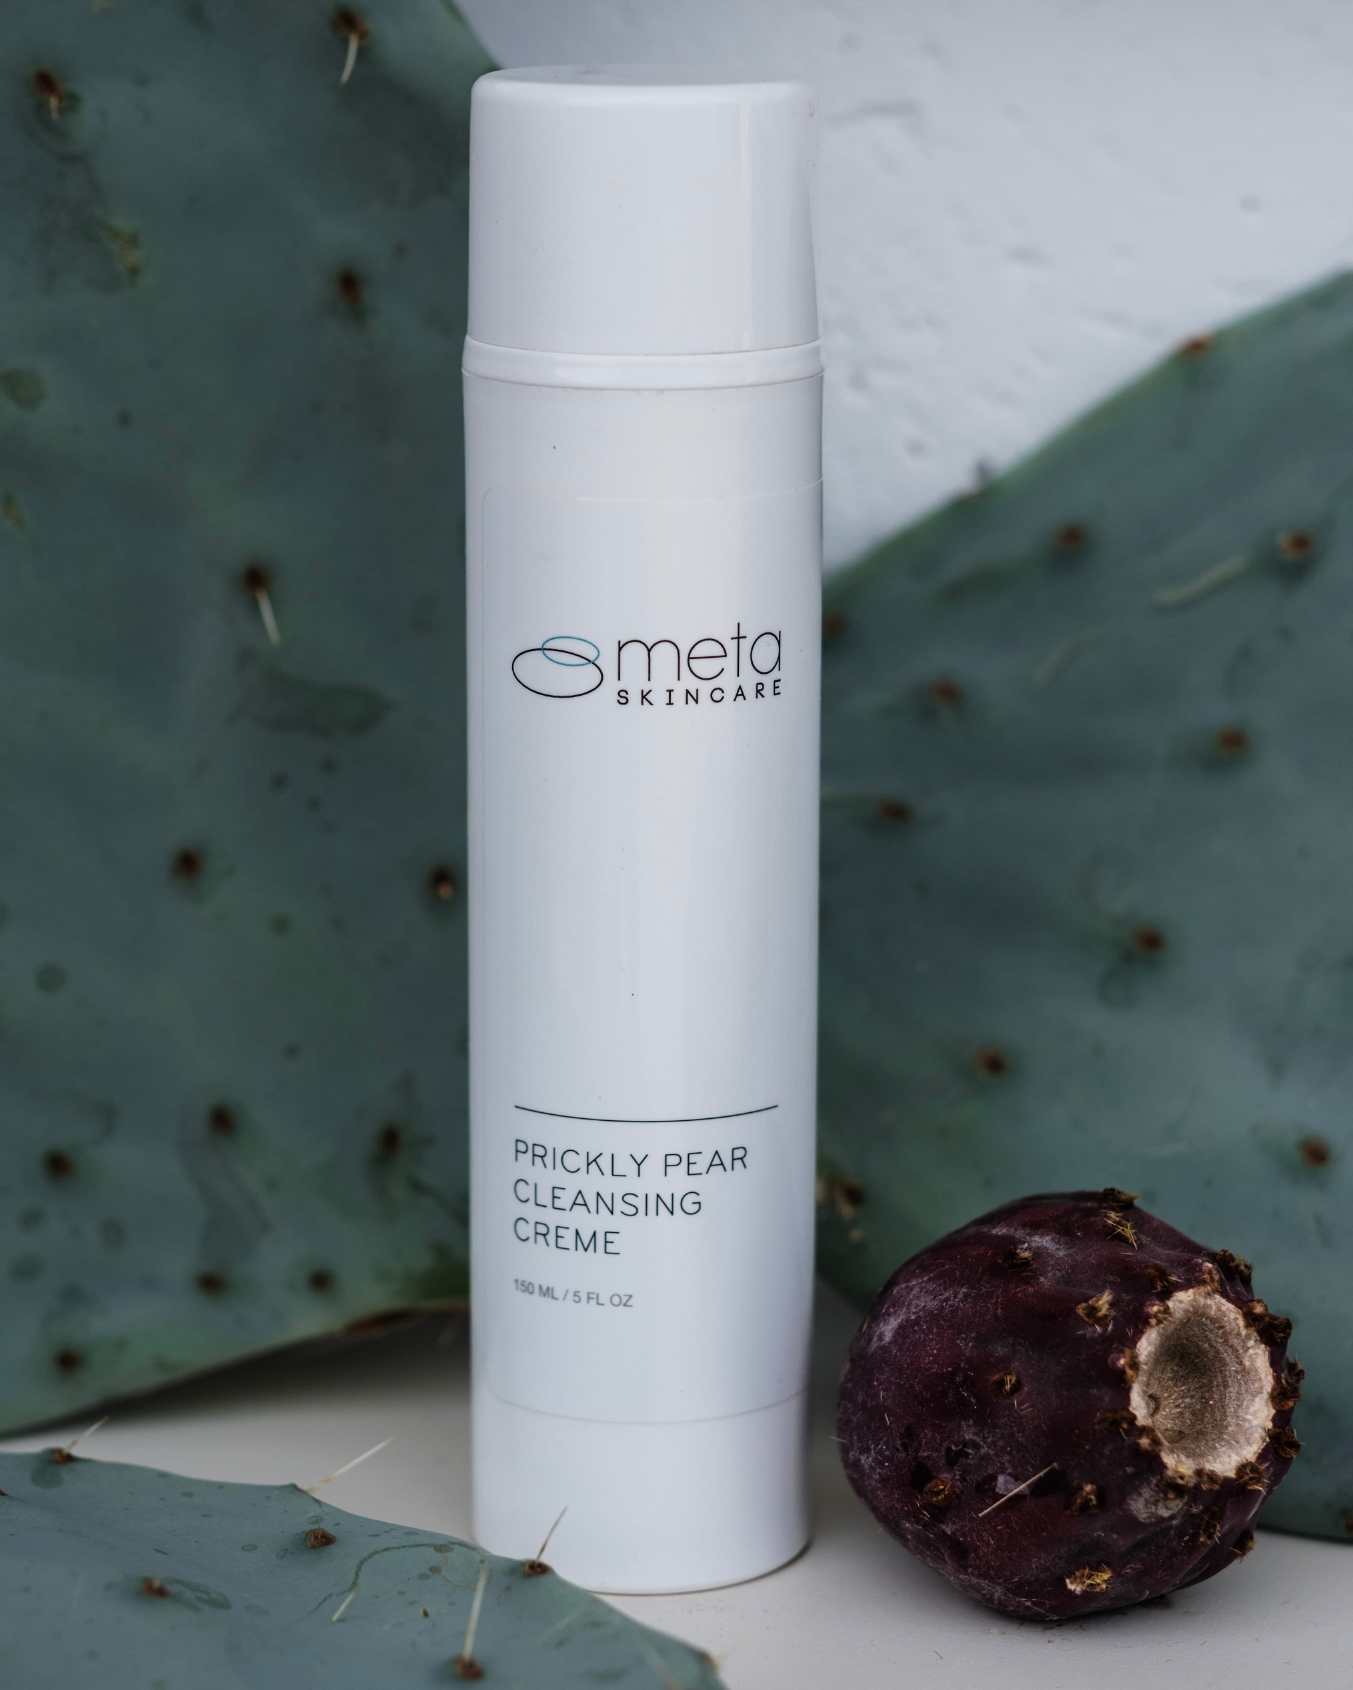 Prickly Pear Cleansing Creme